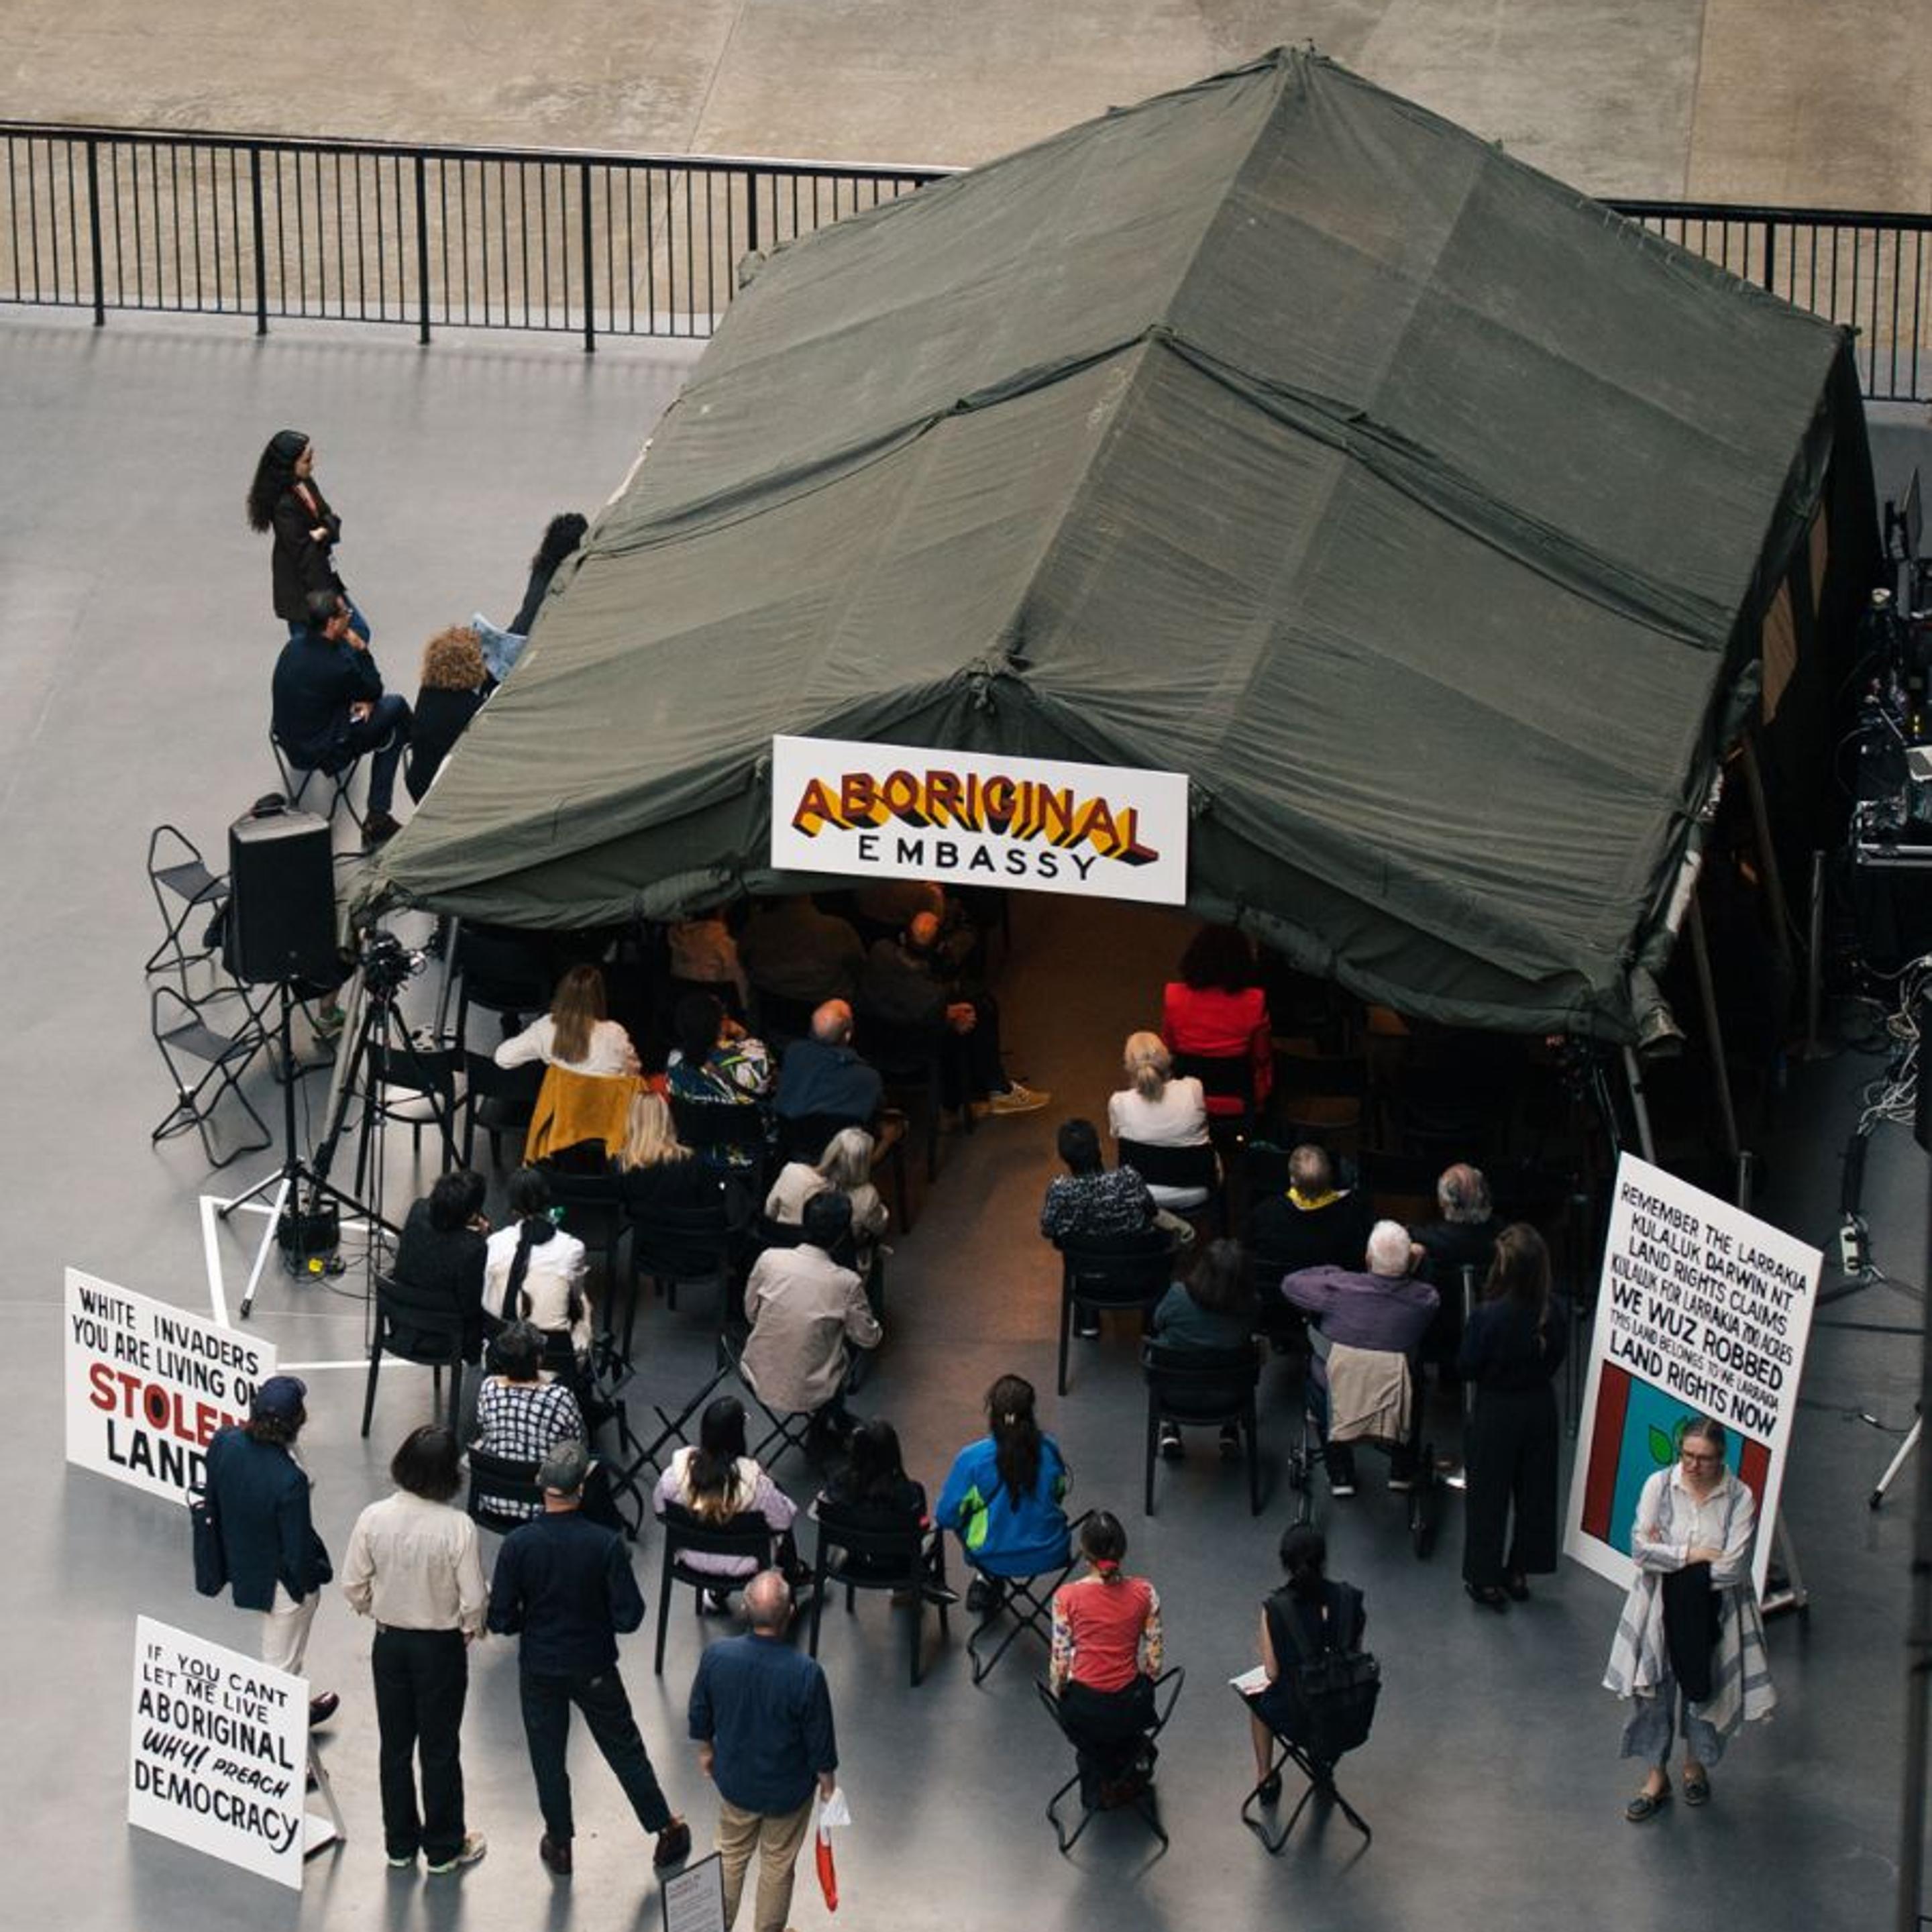 A tent sits within a large gallery space, teeming with visitors. A sign above the tent reads: "Aboriginal Embassy"